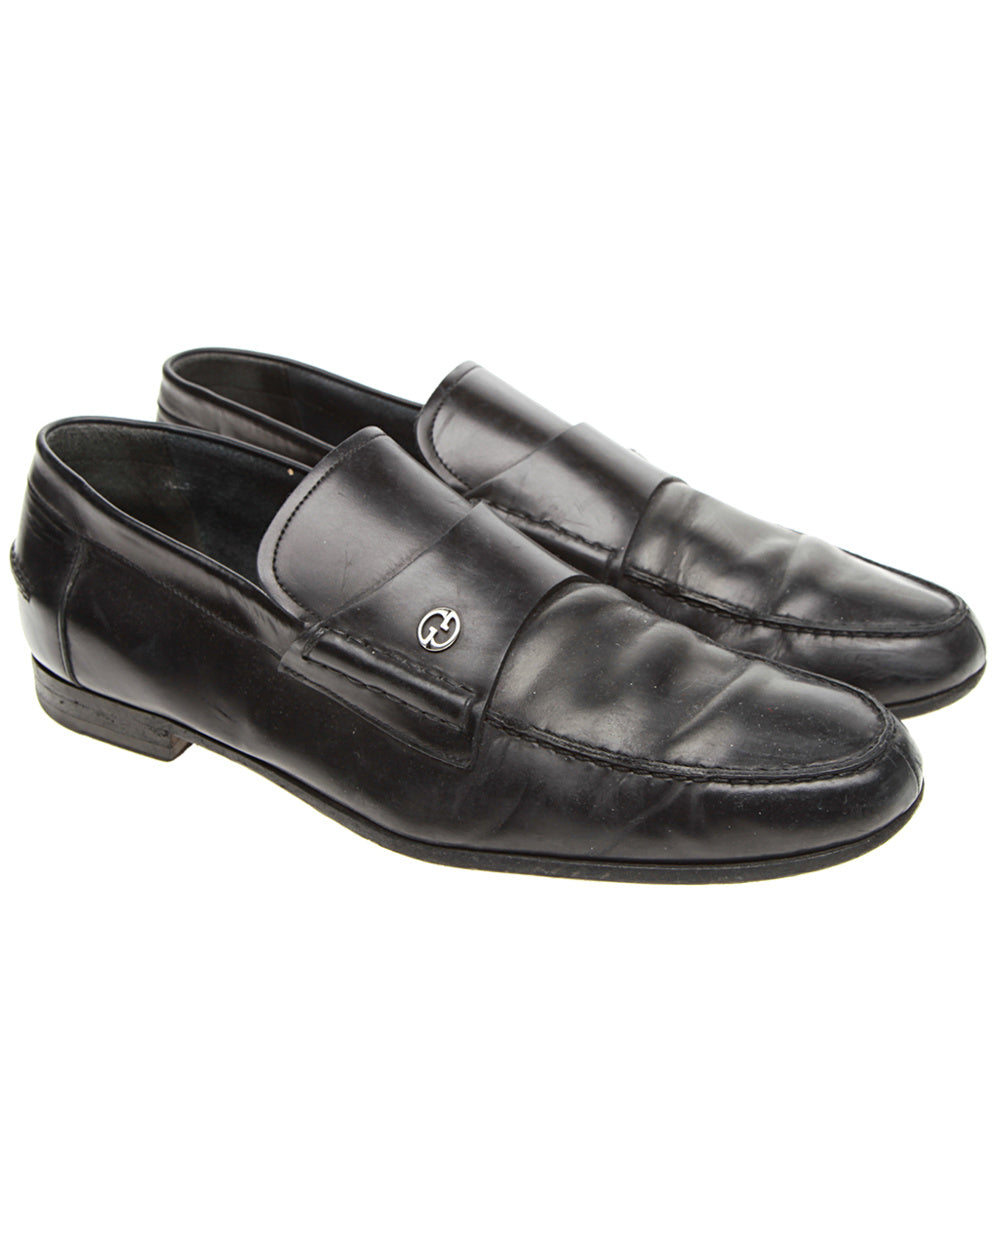 Gucci Black Loafers -  UK 6.5